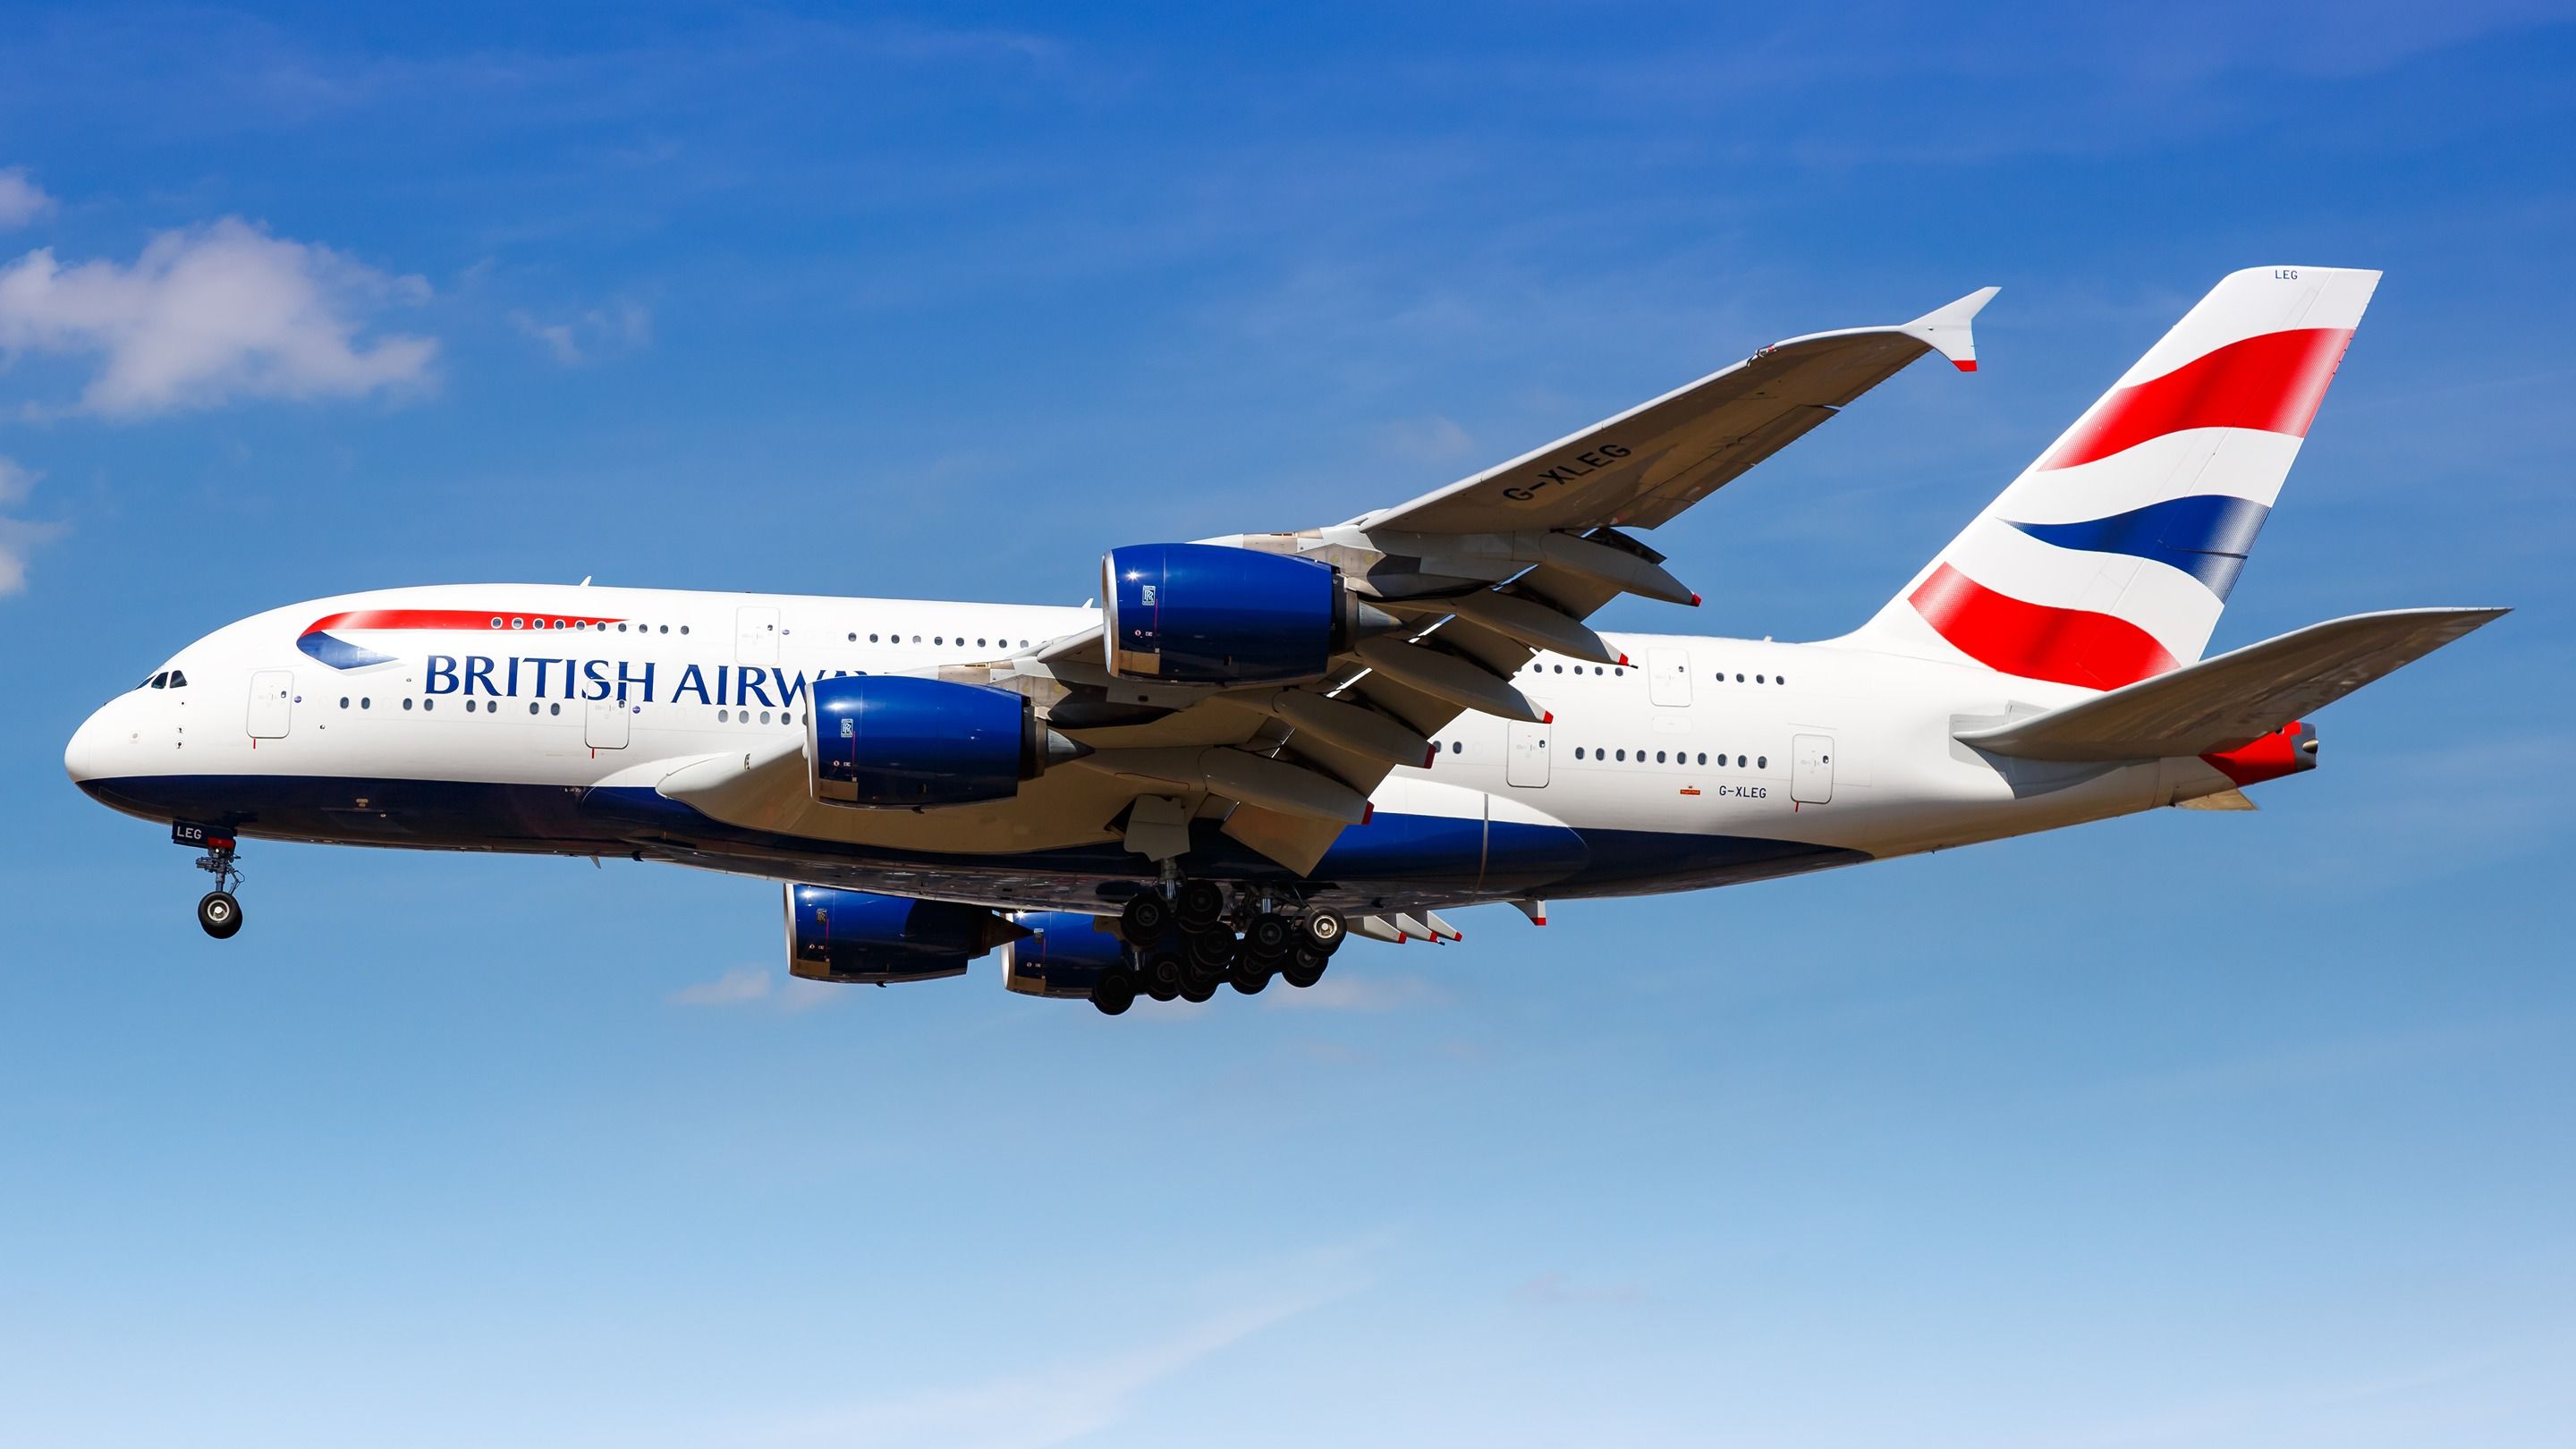 A British Airways Airbus A380 on final approach